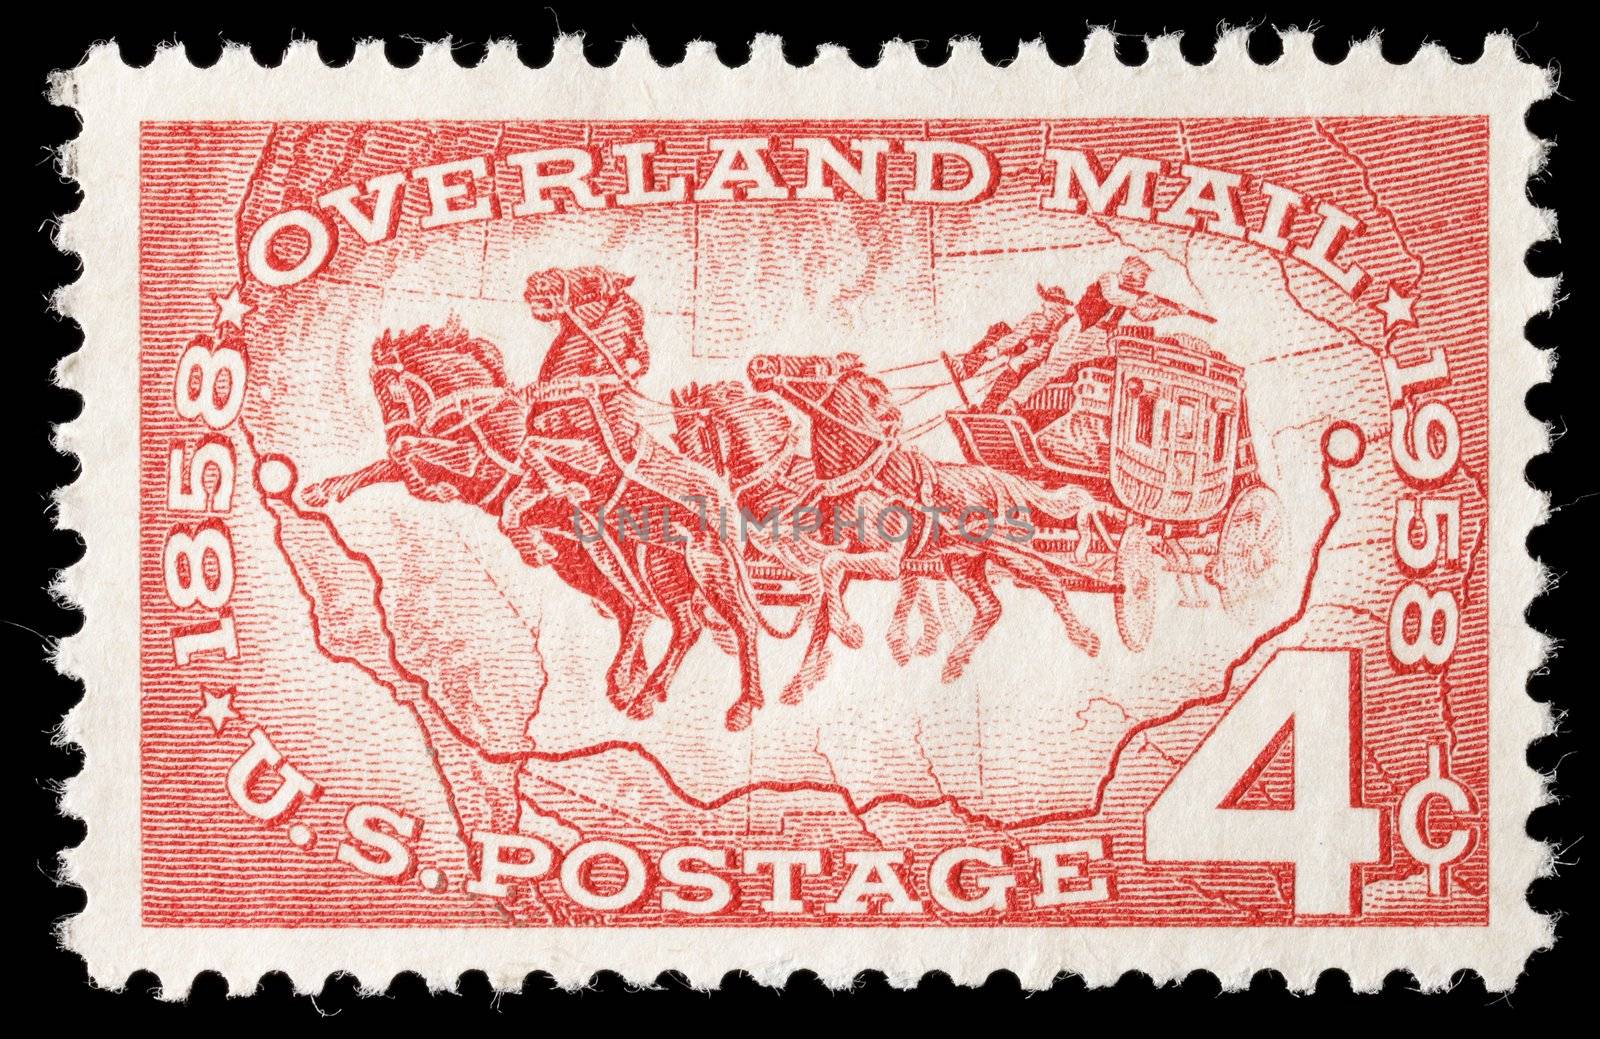 Overland Mail 100 years by Stocksnapper